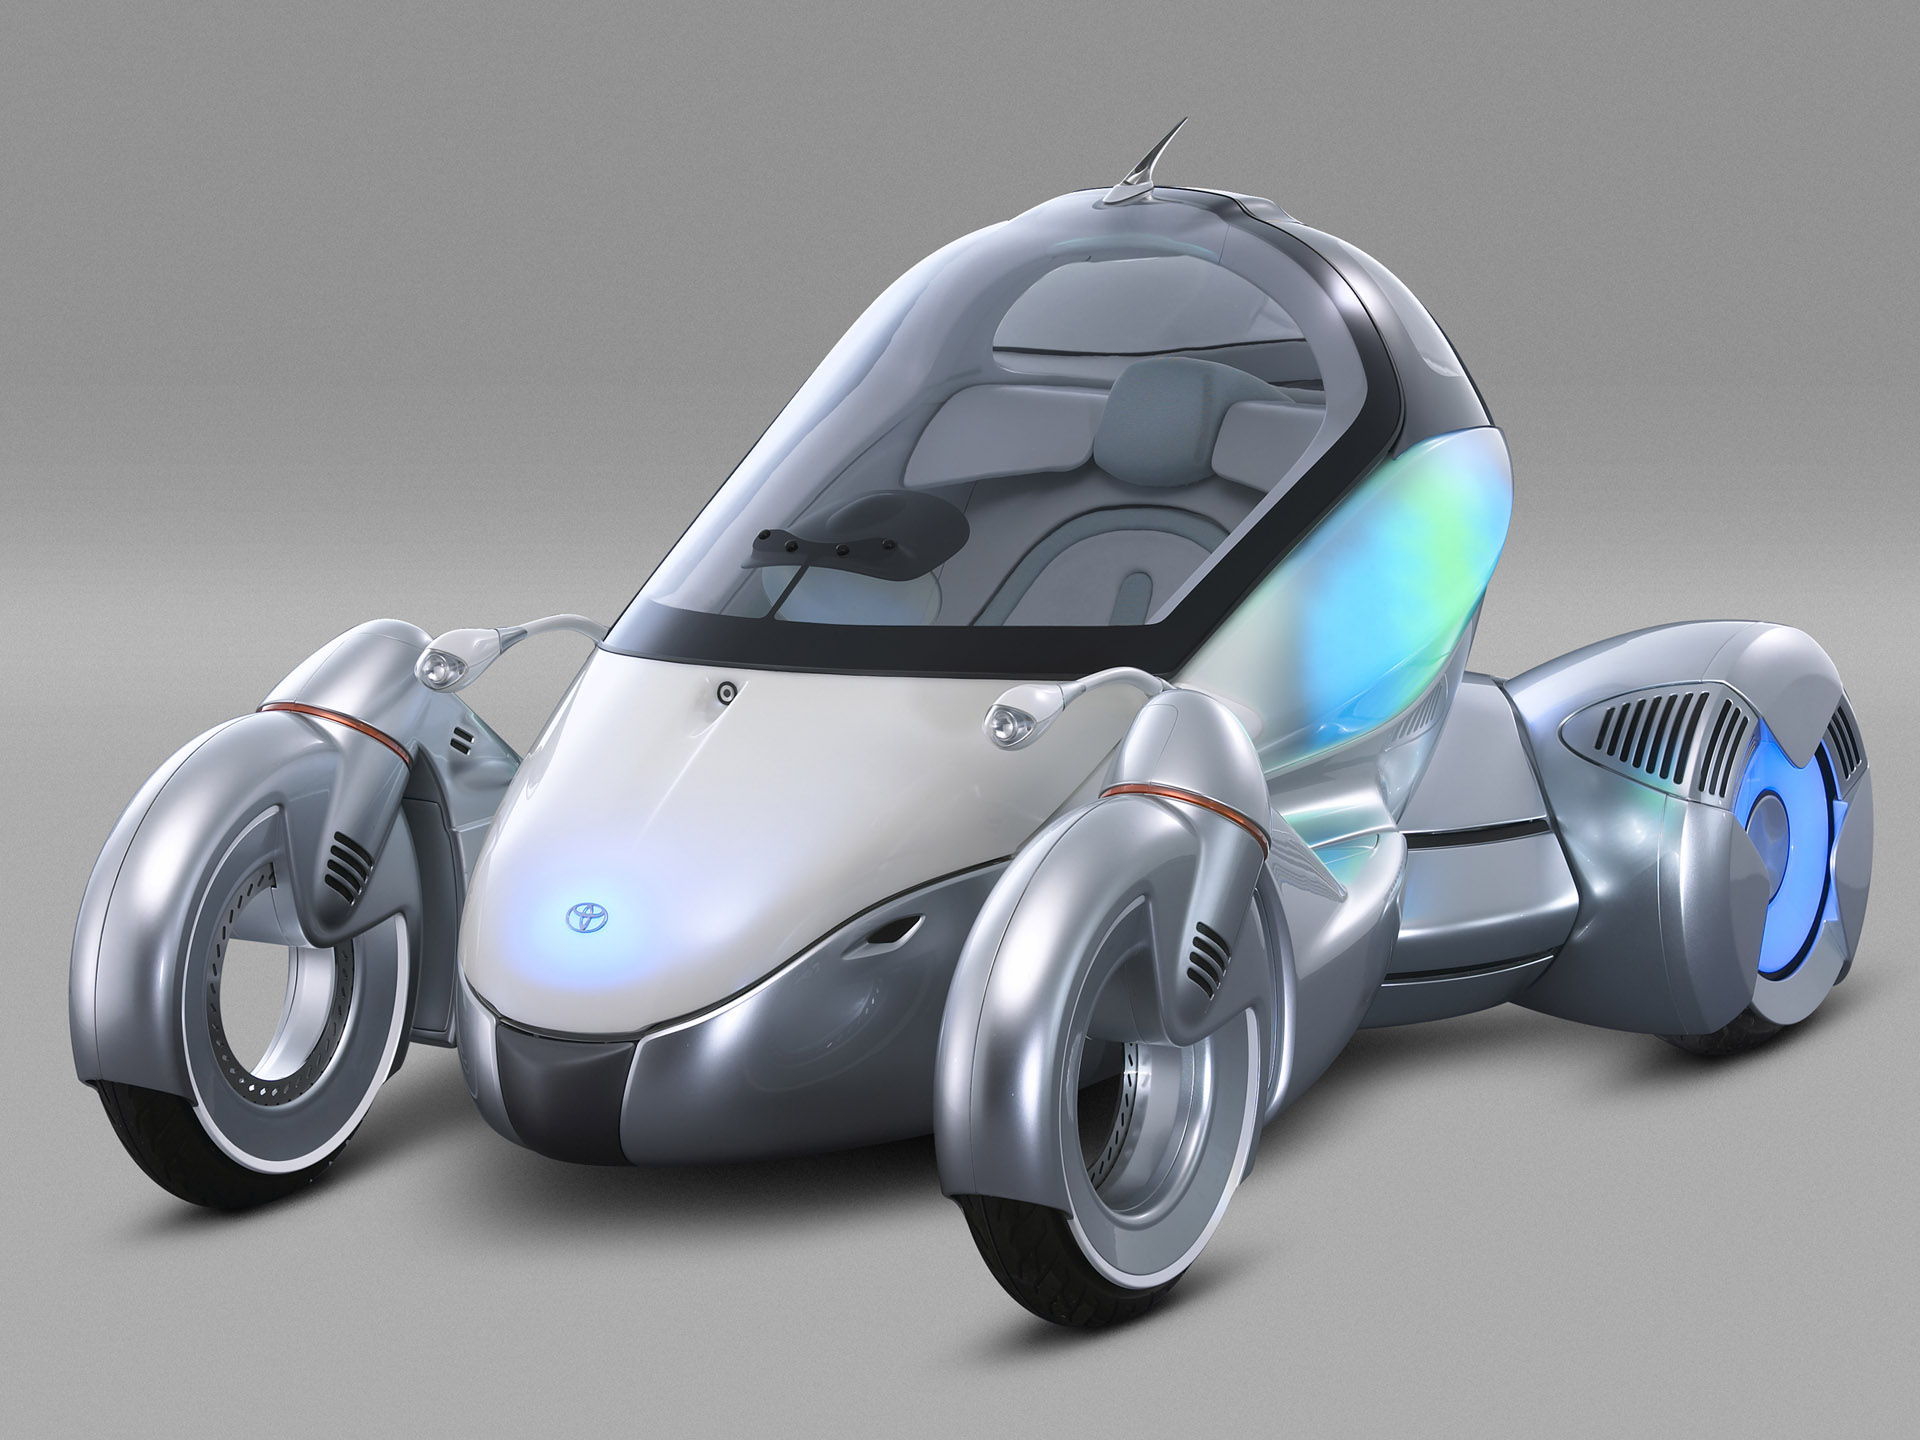 2003 Toyota PM (Personal Mobility) Concept